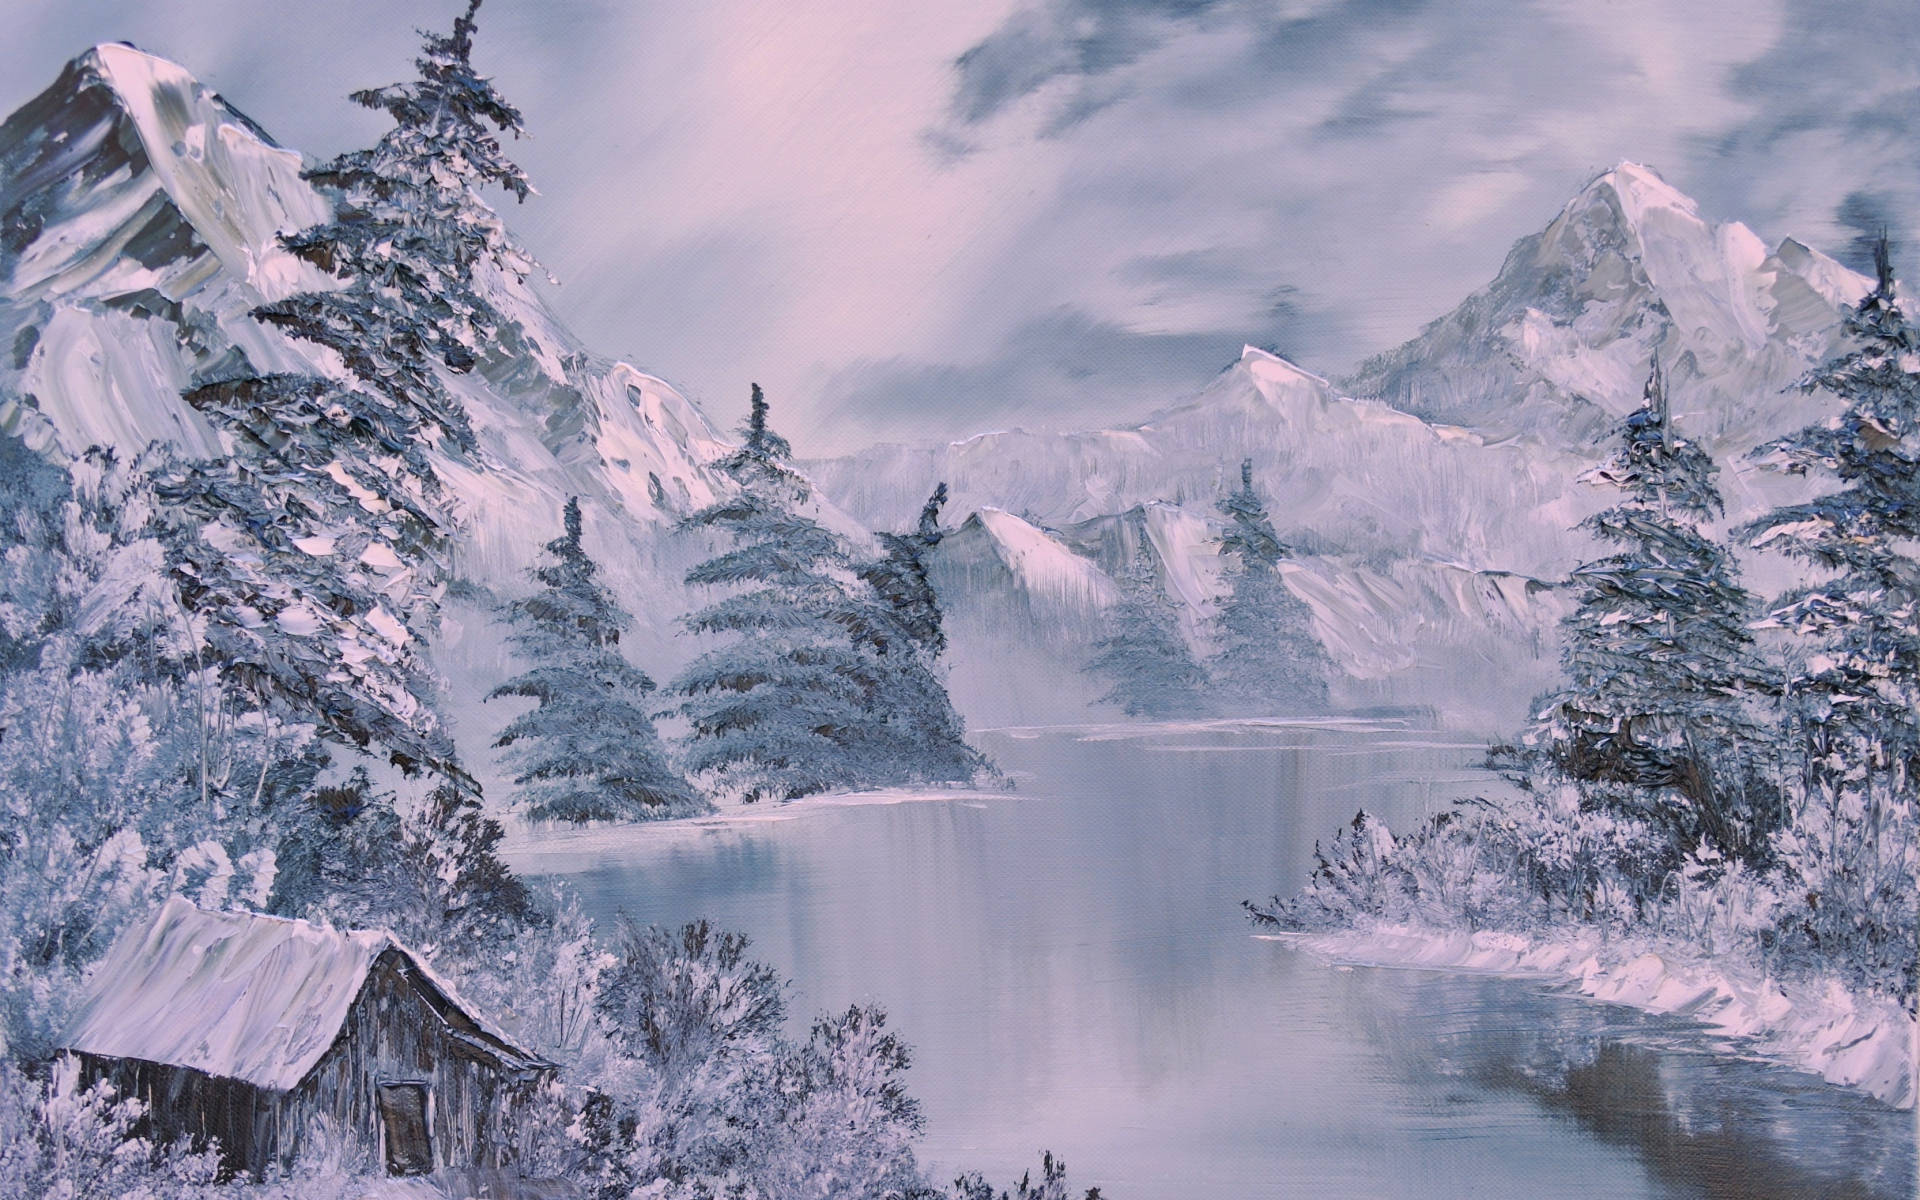 River Winter Scenery Painting Wallpaper